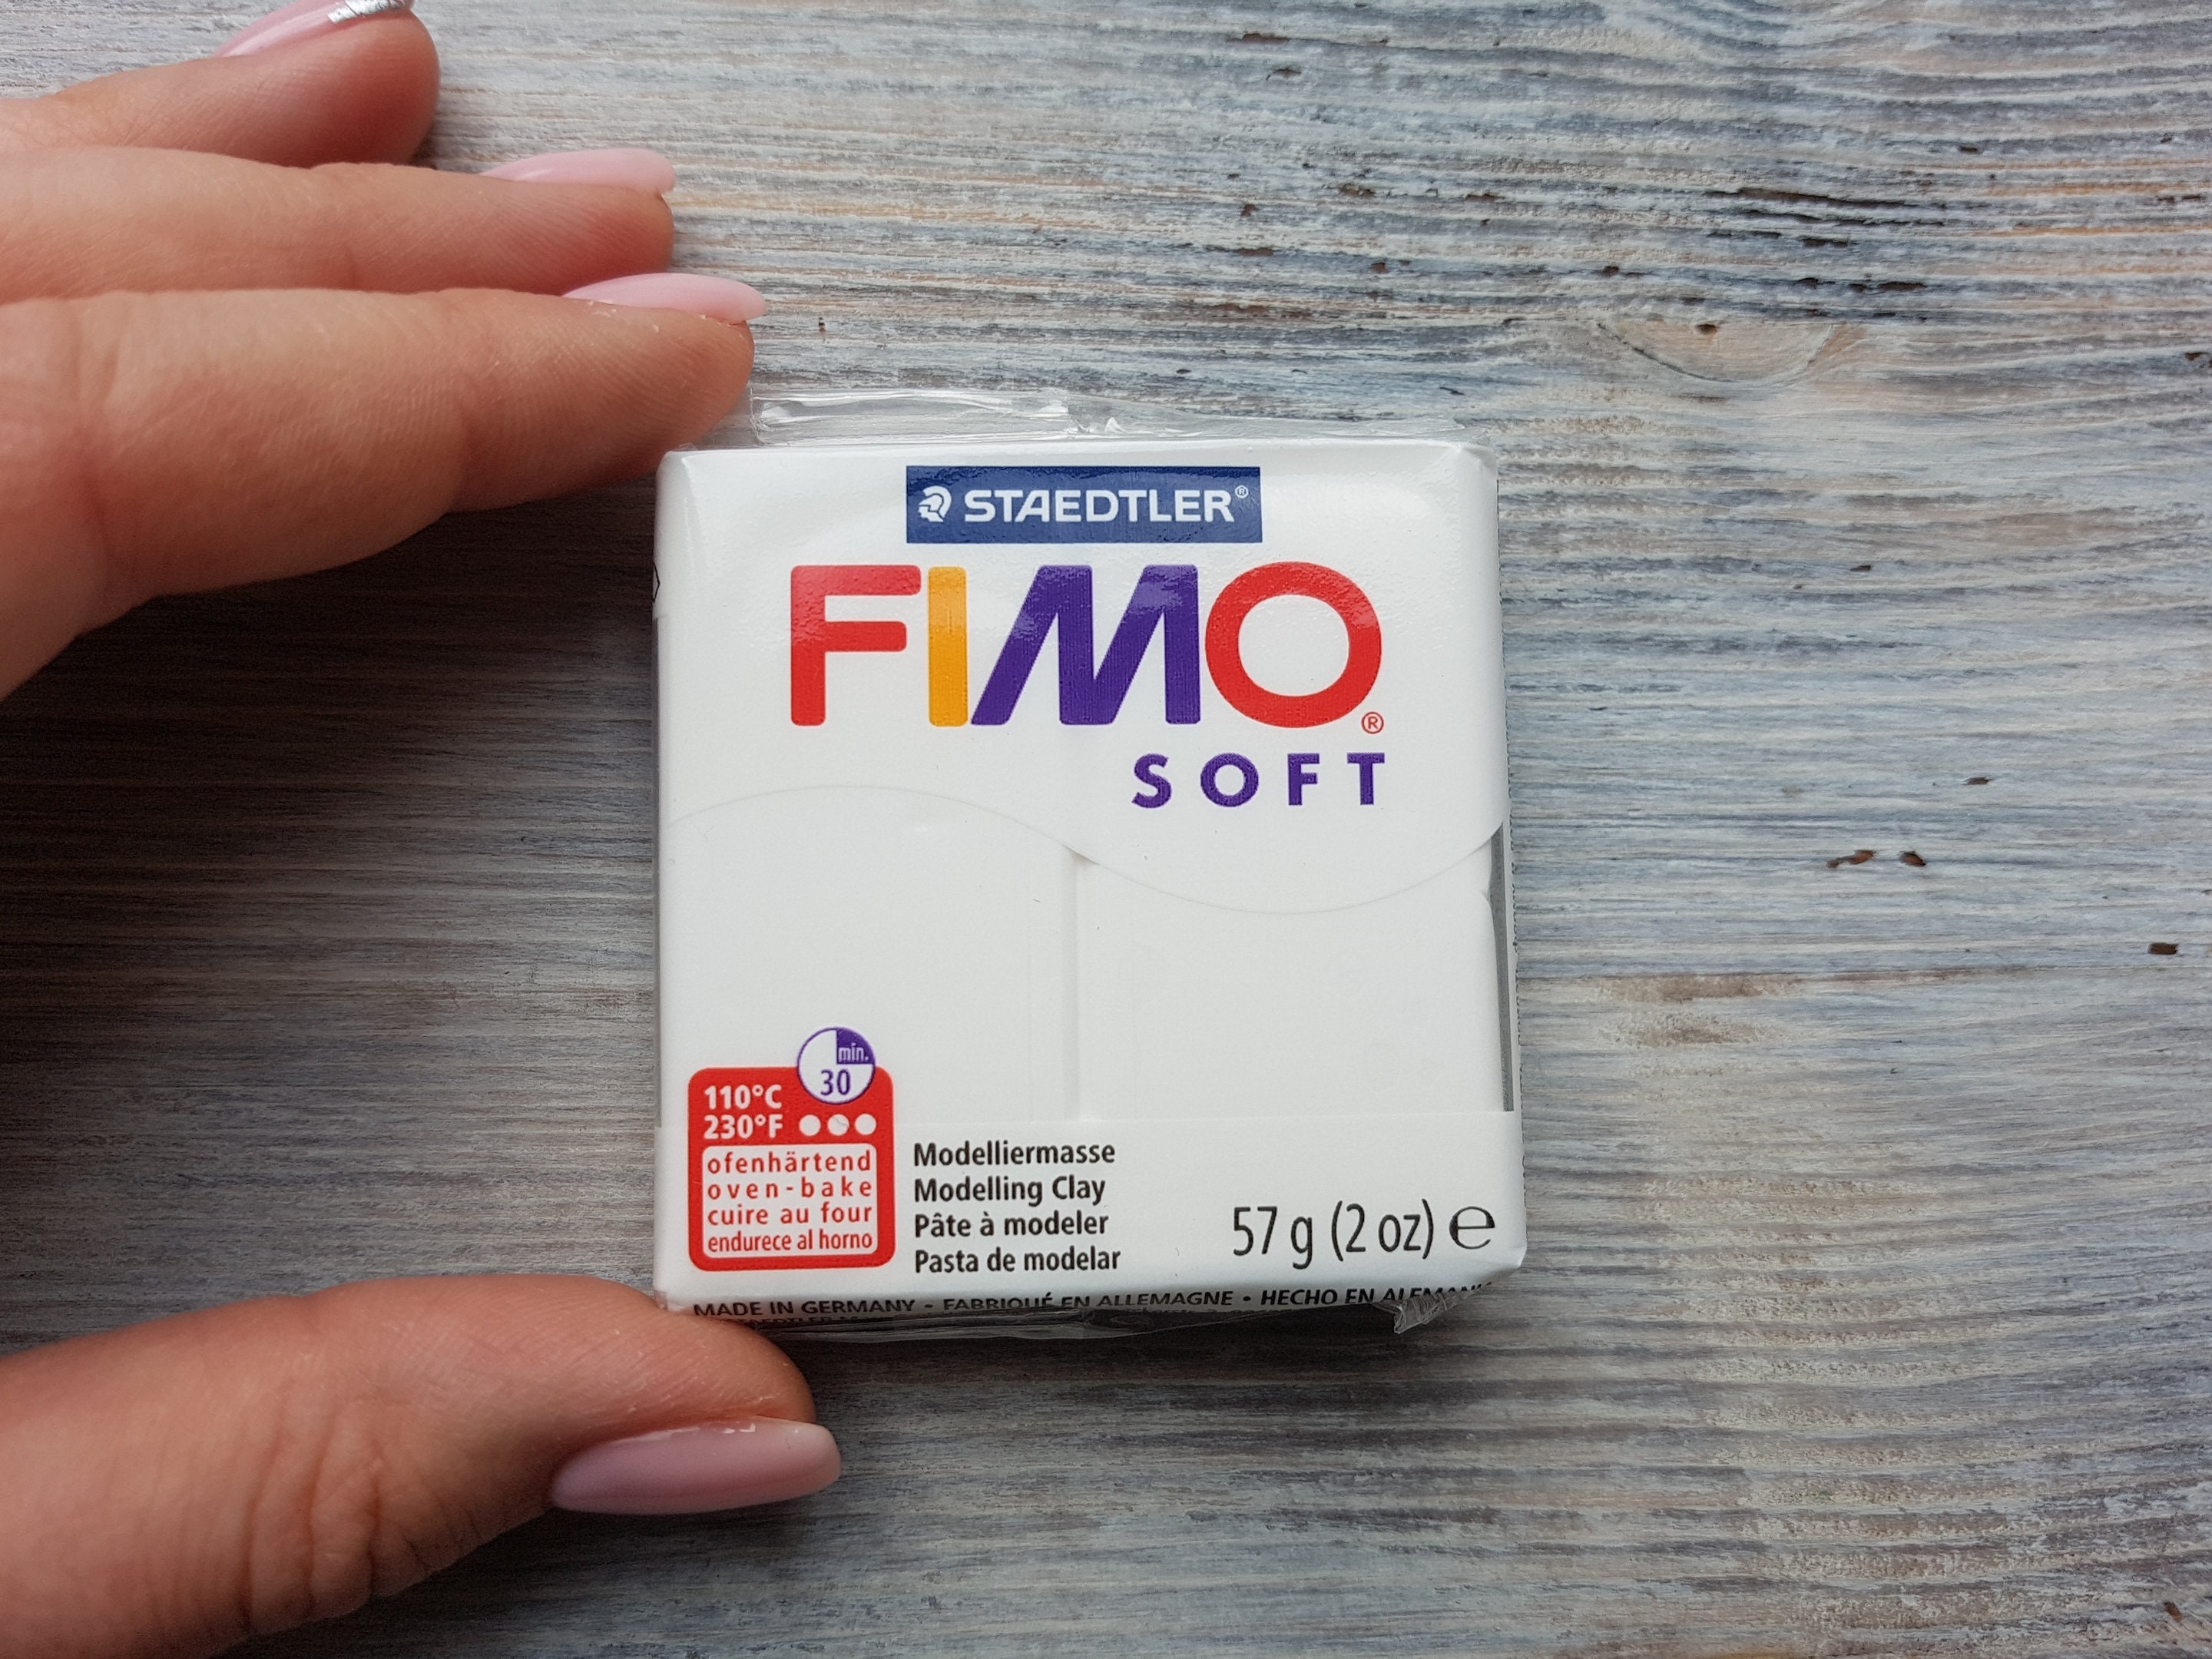 Staedtler Fimo Professional Polymer Clay - White, 2 oz